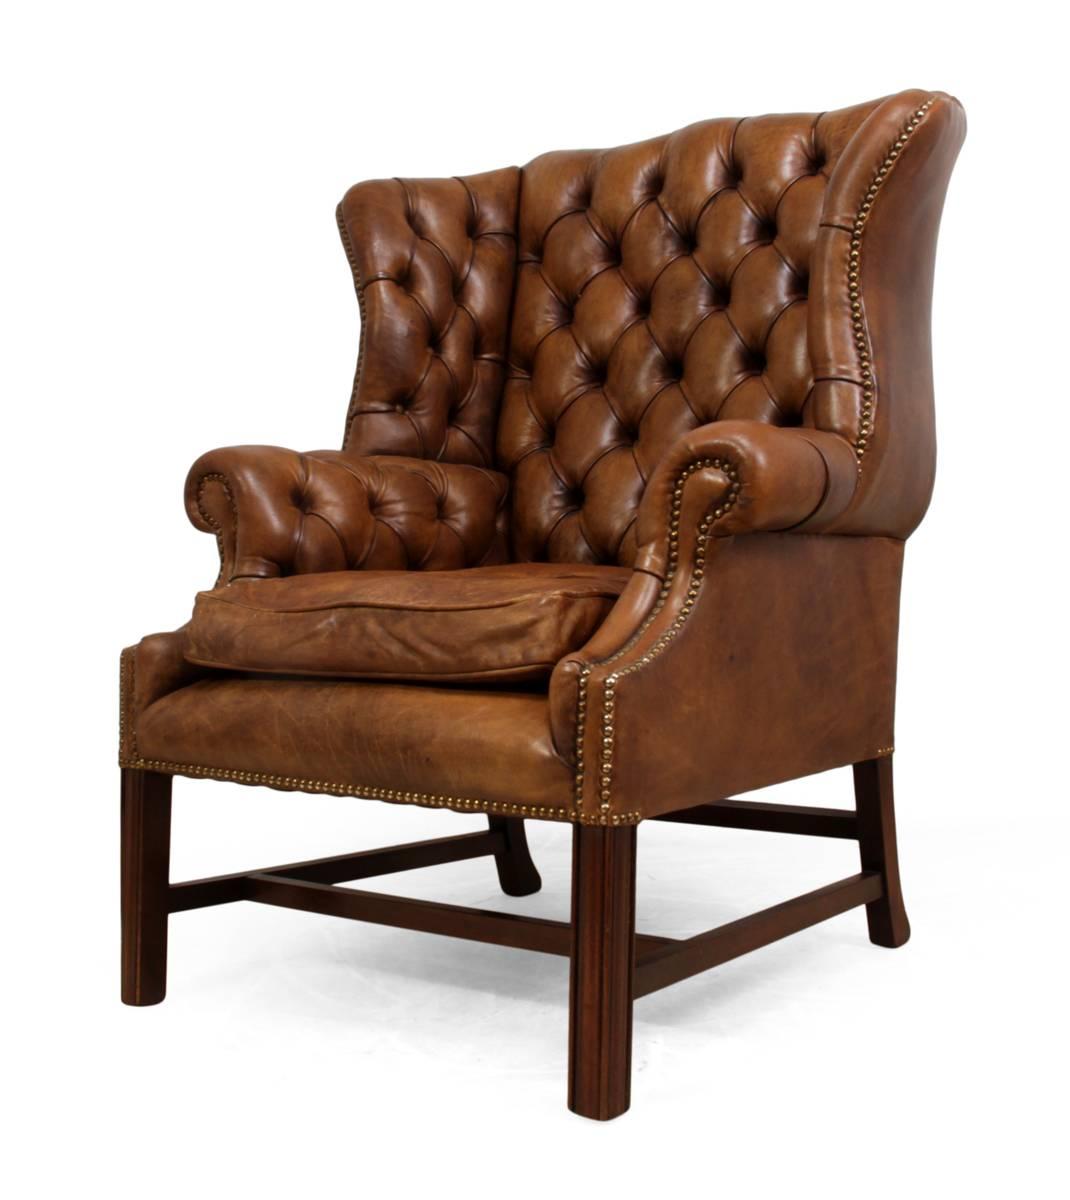 Mid-20th Century Vintage Leather Wing Chair